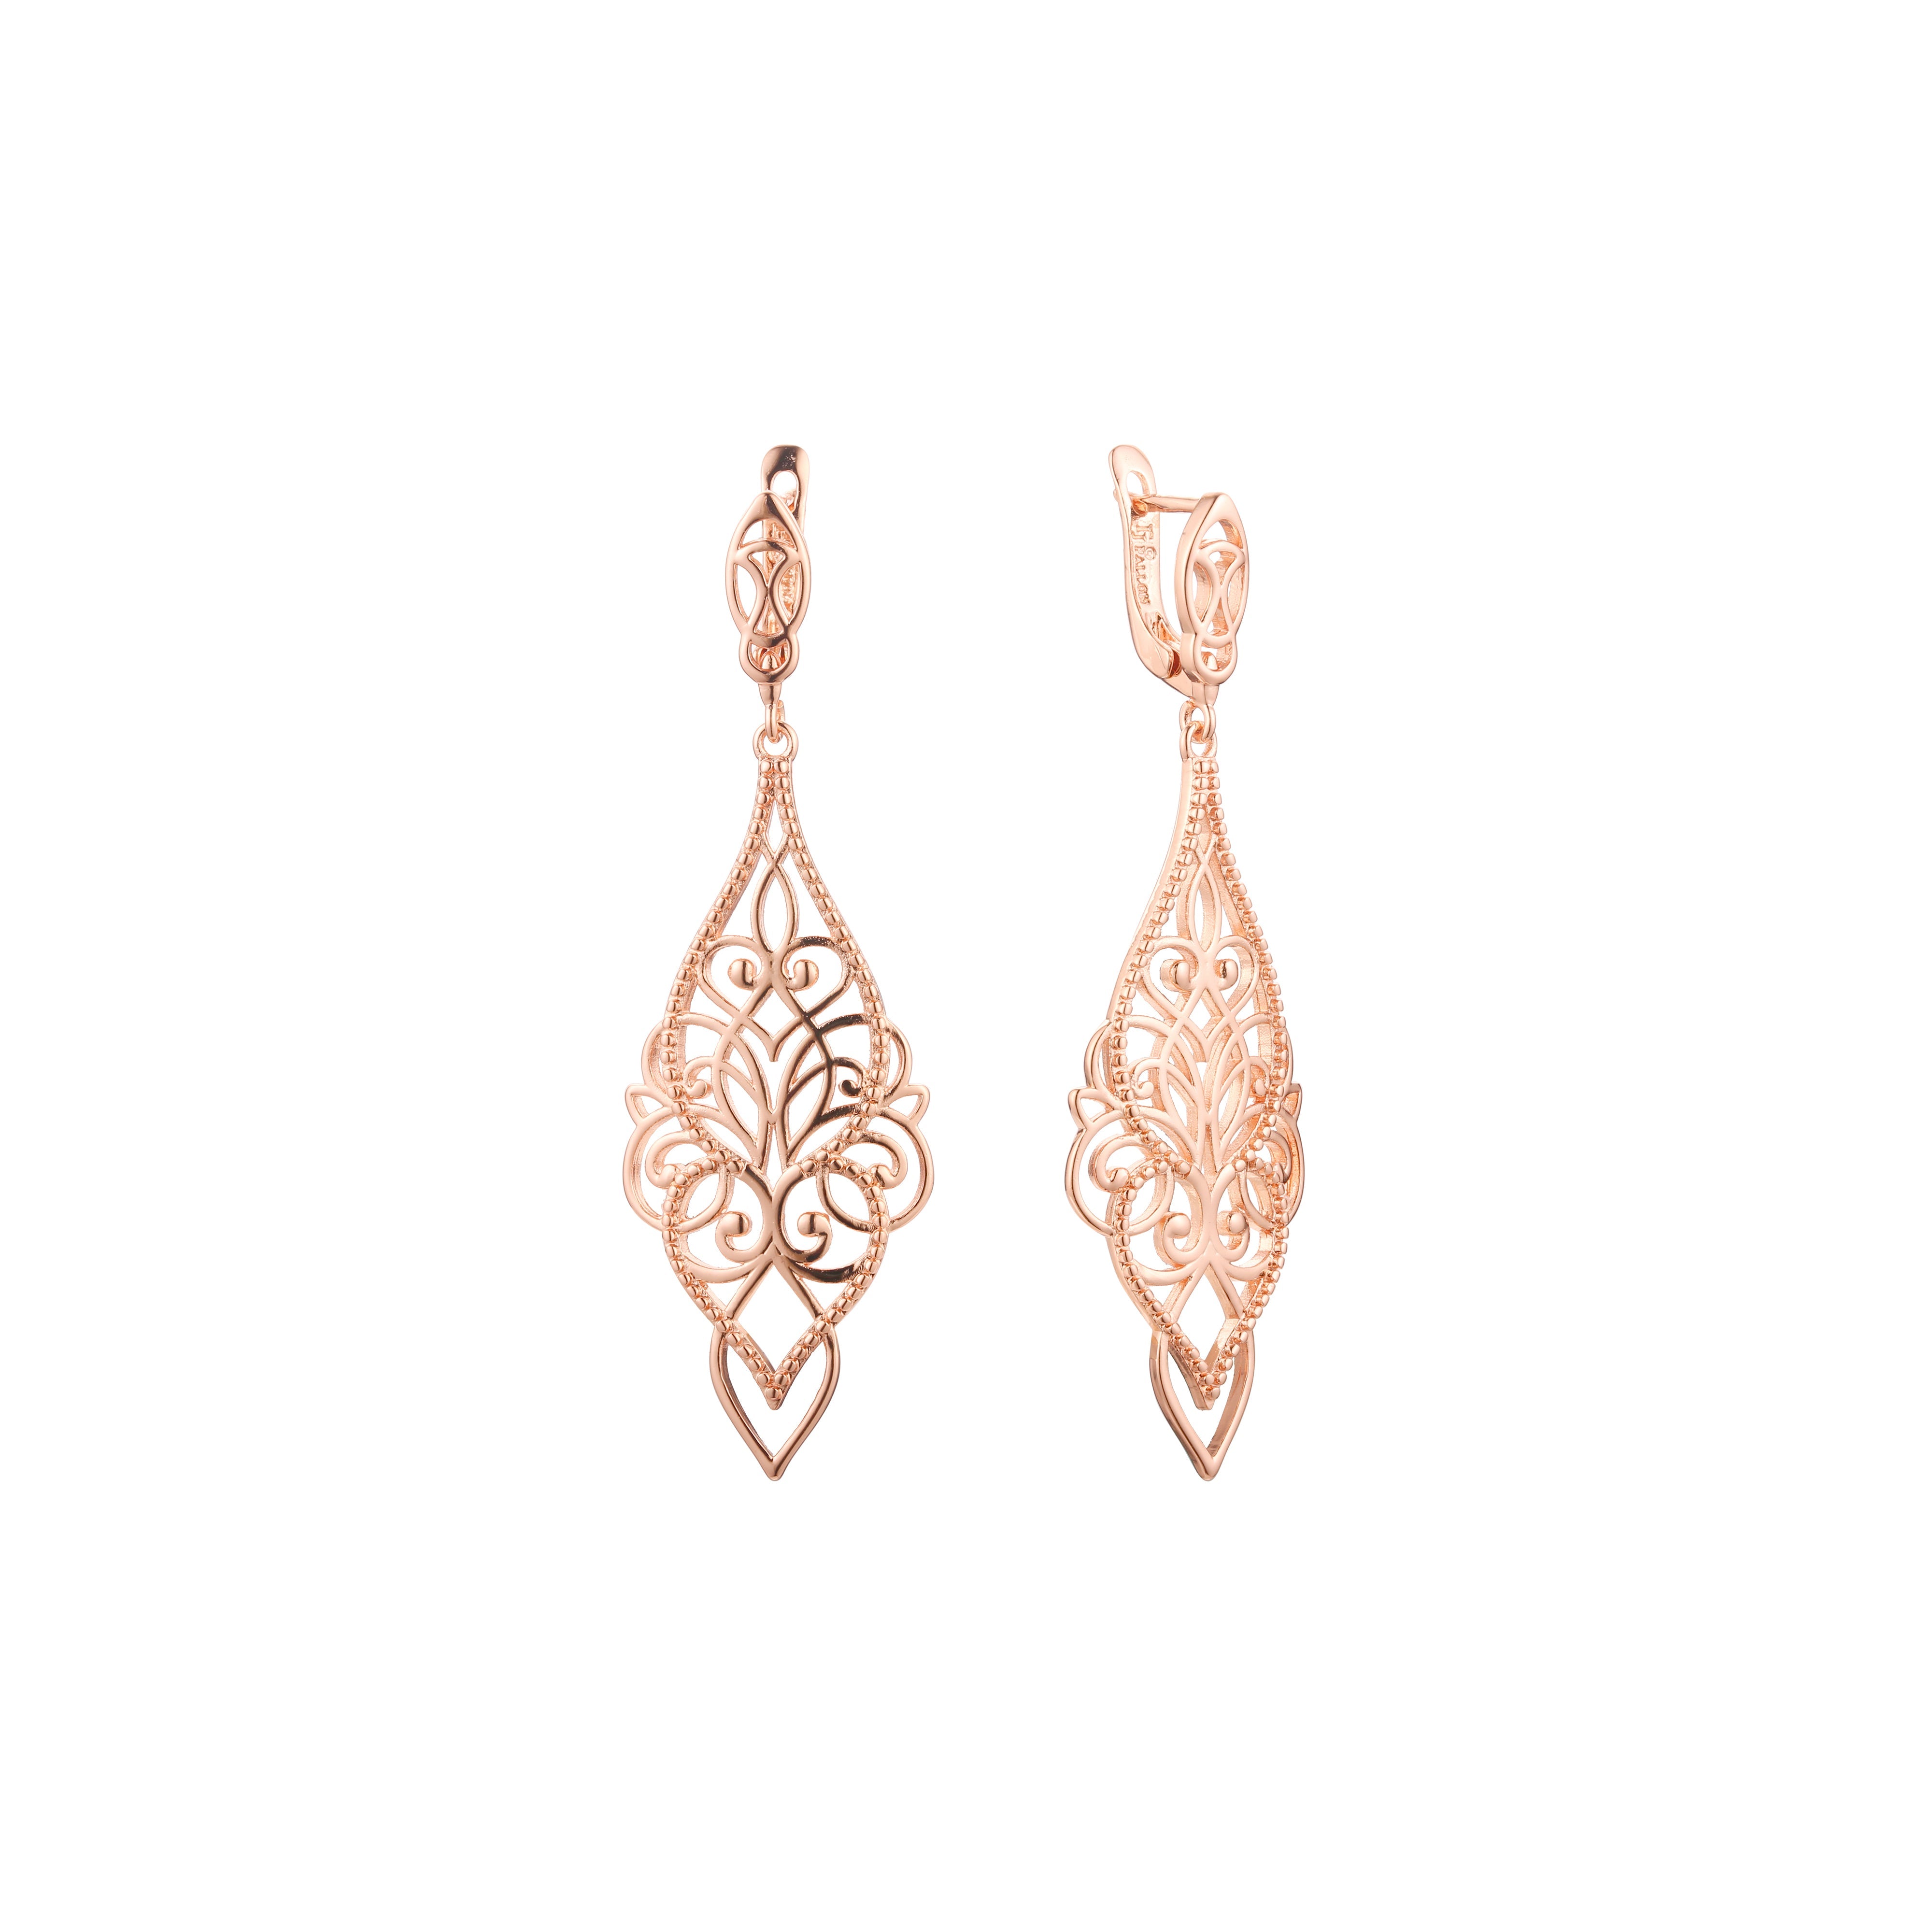 Earrings in 14K Gold, Rose Gold plating colors